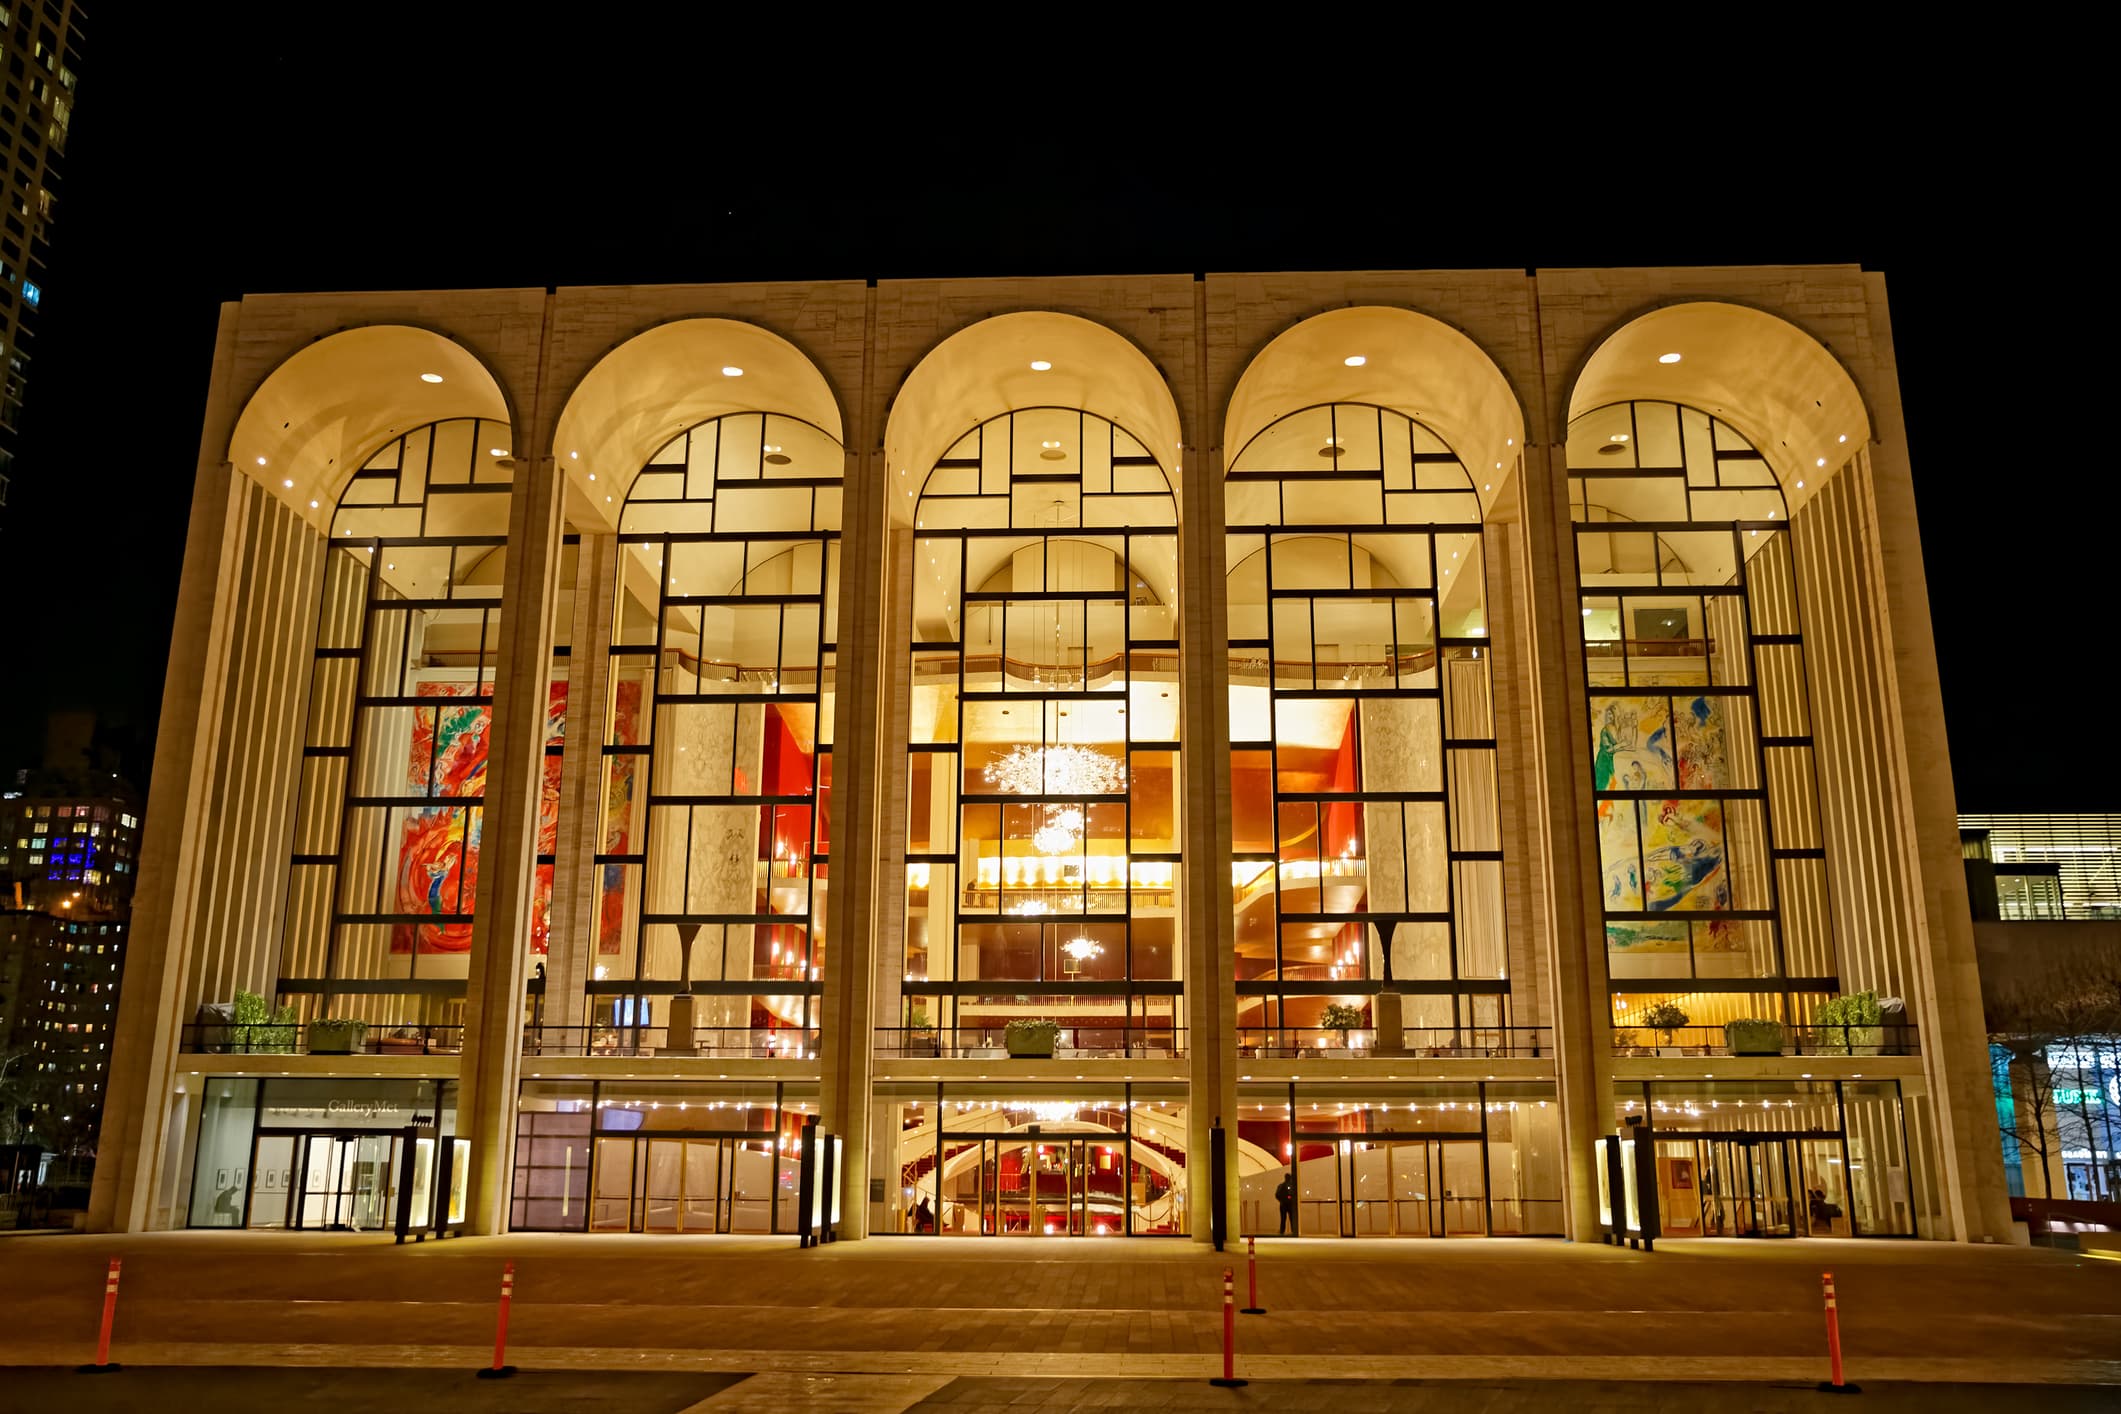 A view of the front windows and chandeliers of the Metropolitan Opera House in New York City.